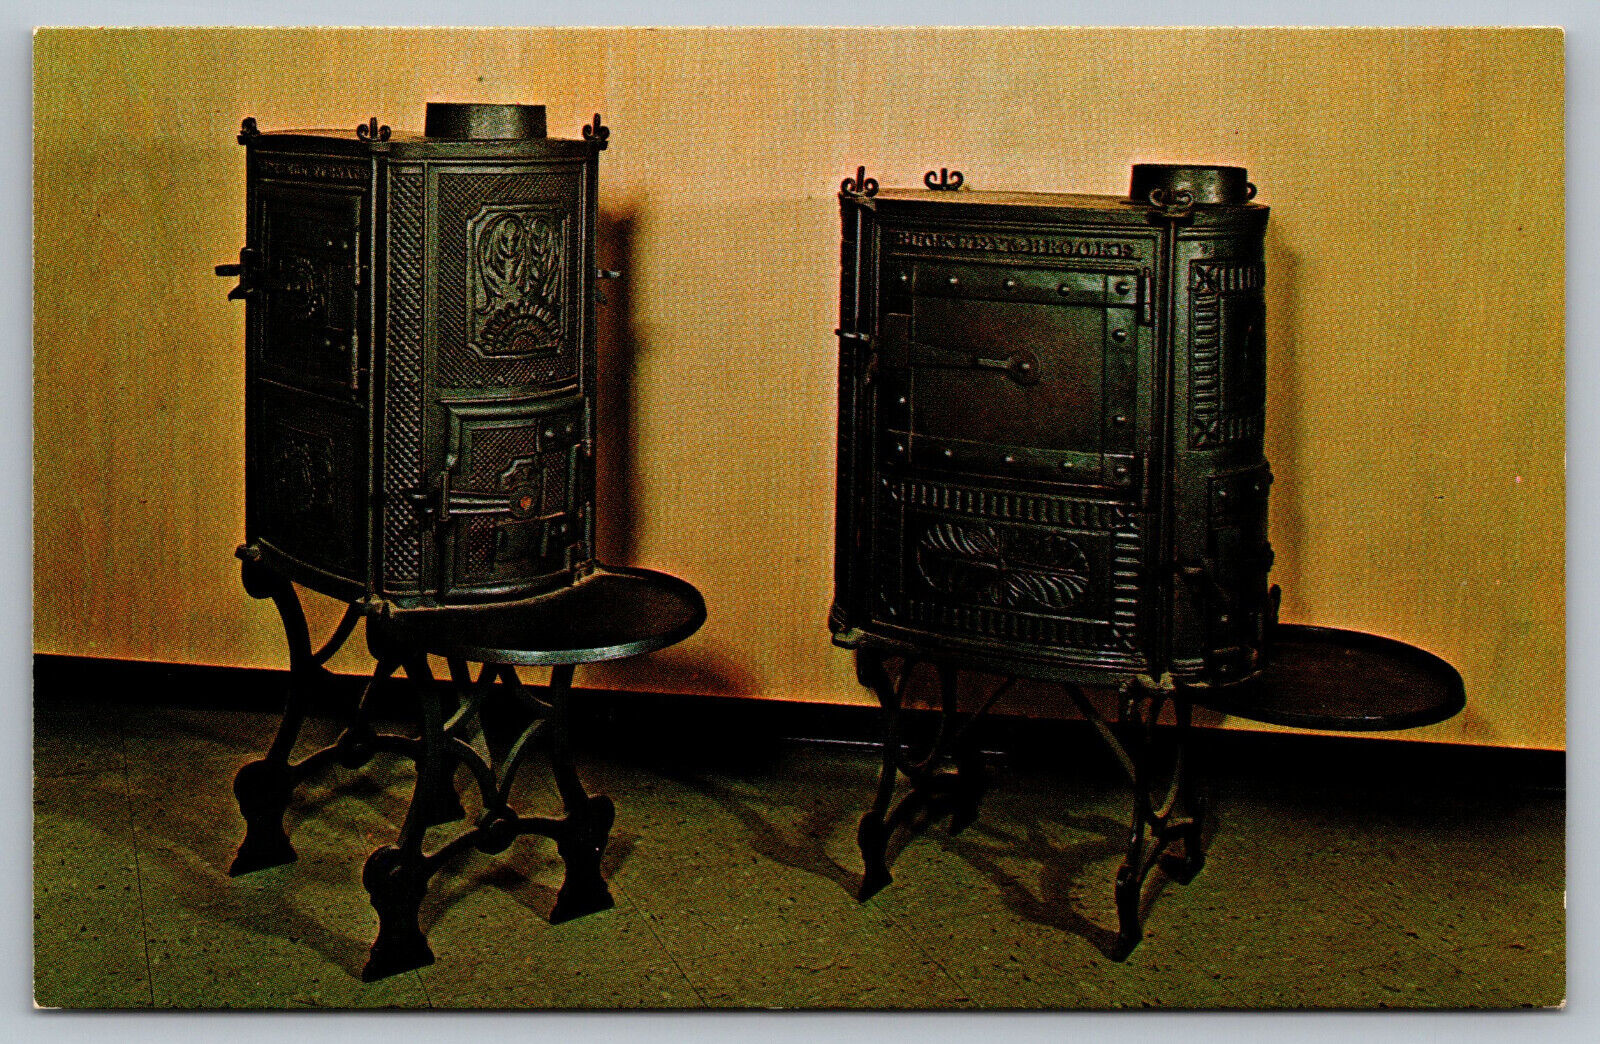 Postcard Hopewell Stove Hopewell Village, Cast 5000 Stoves Annually PA D13